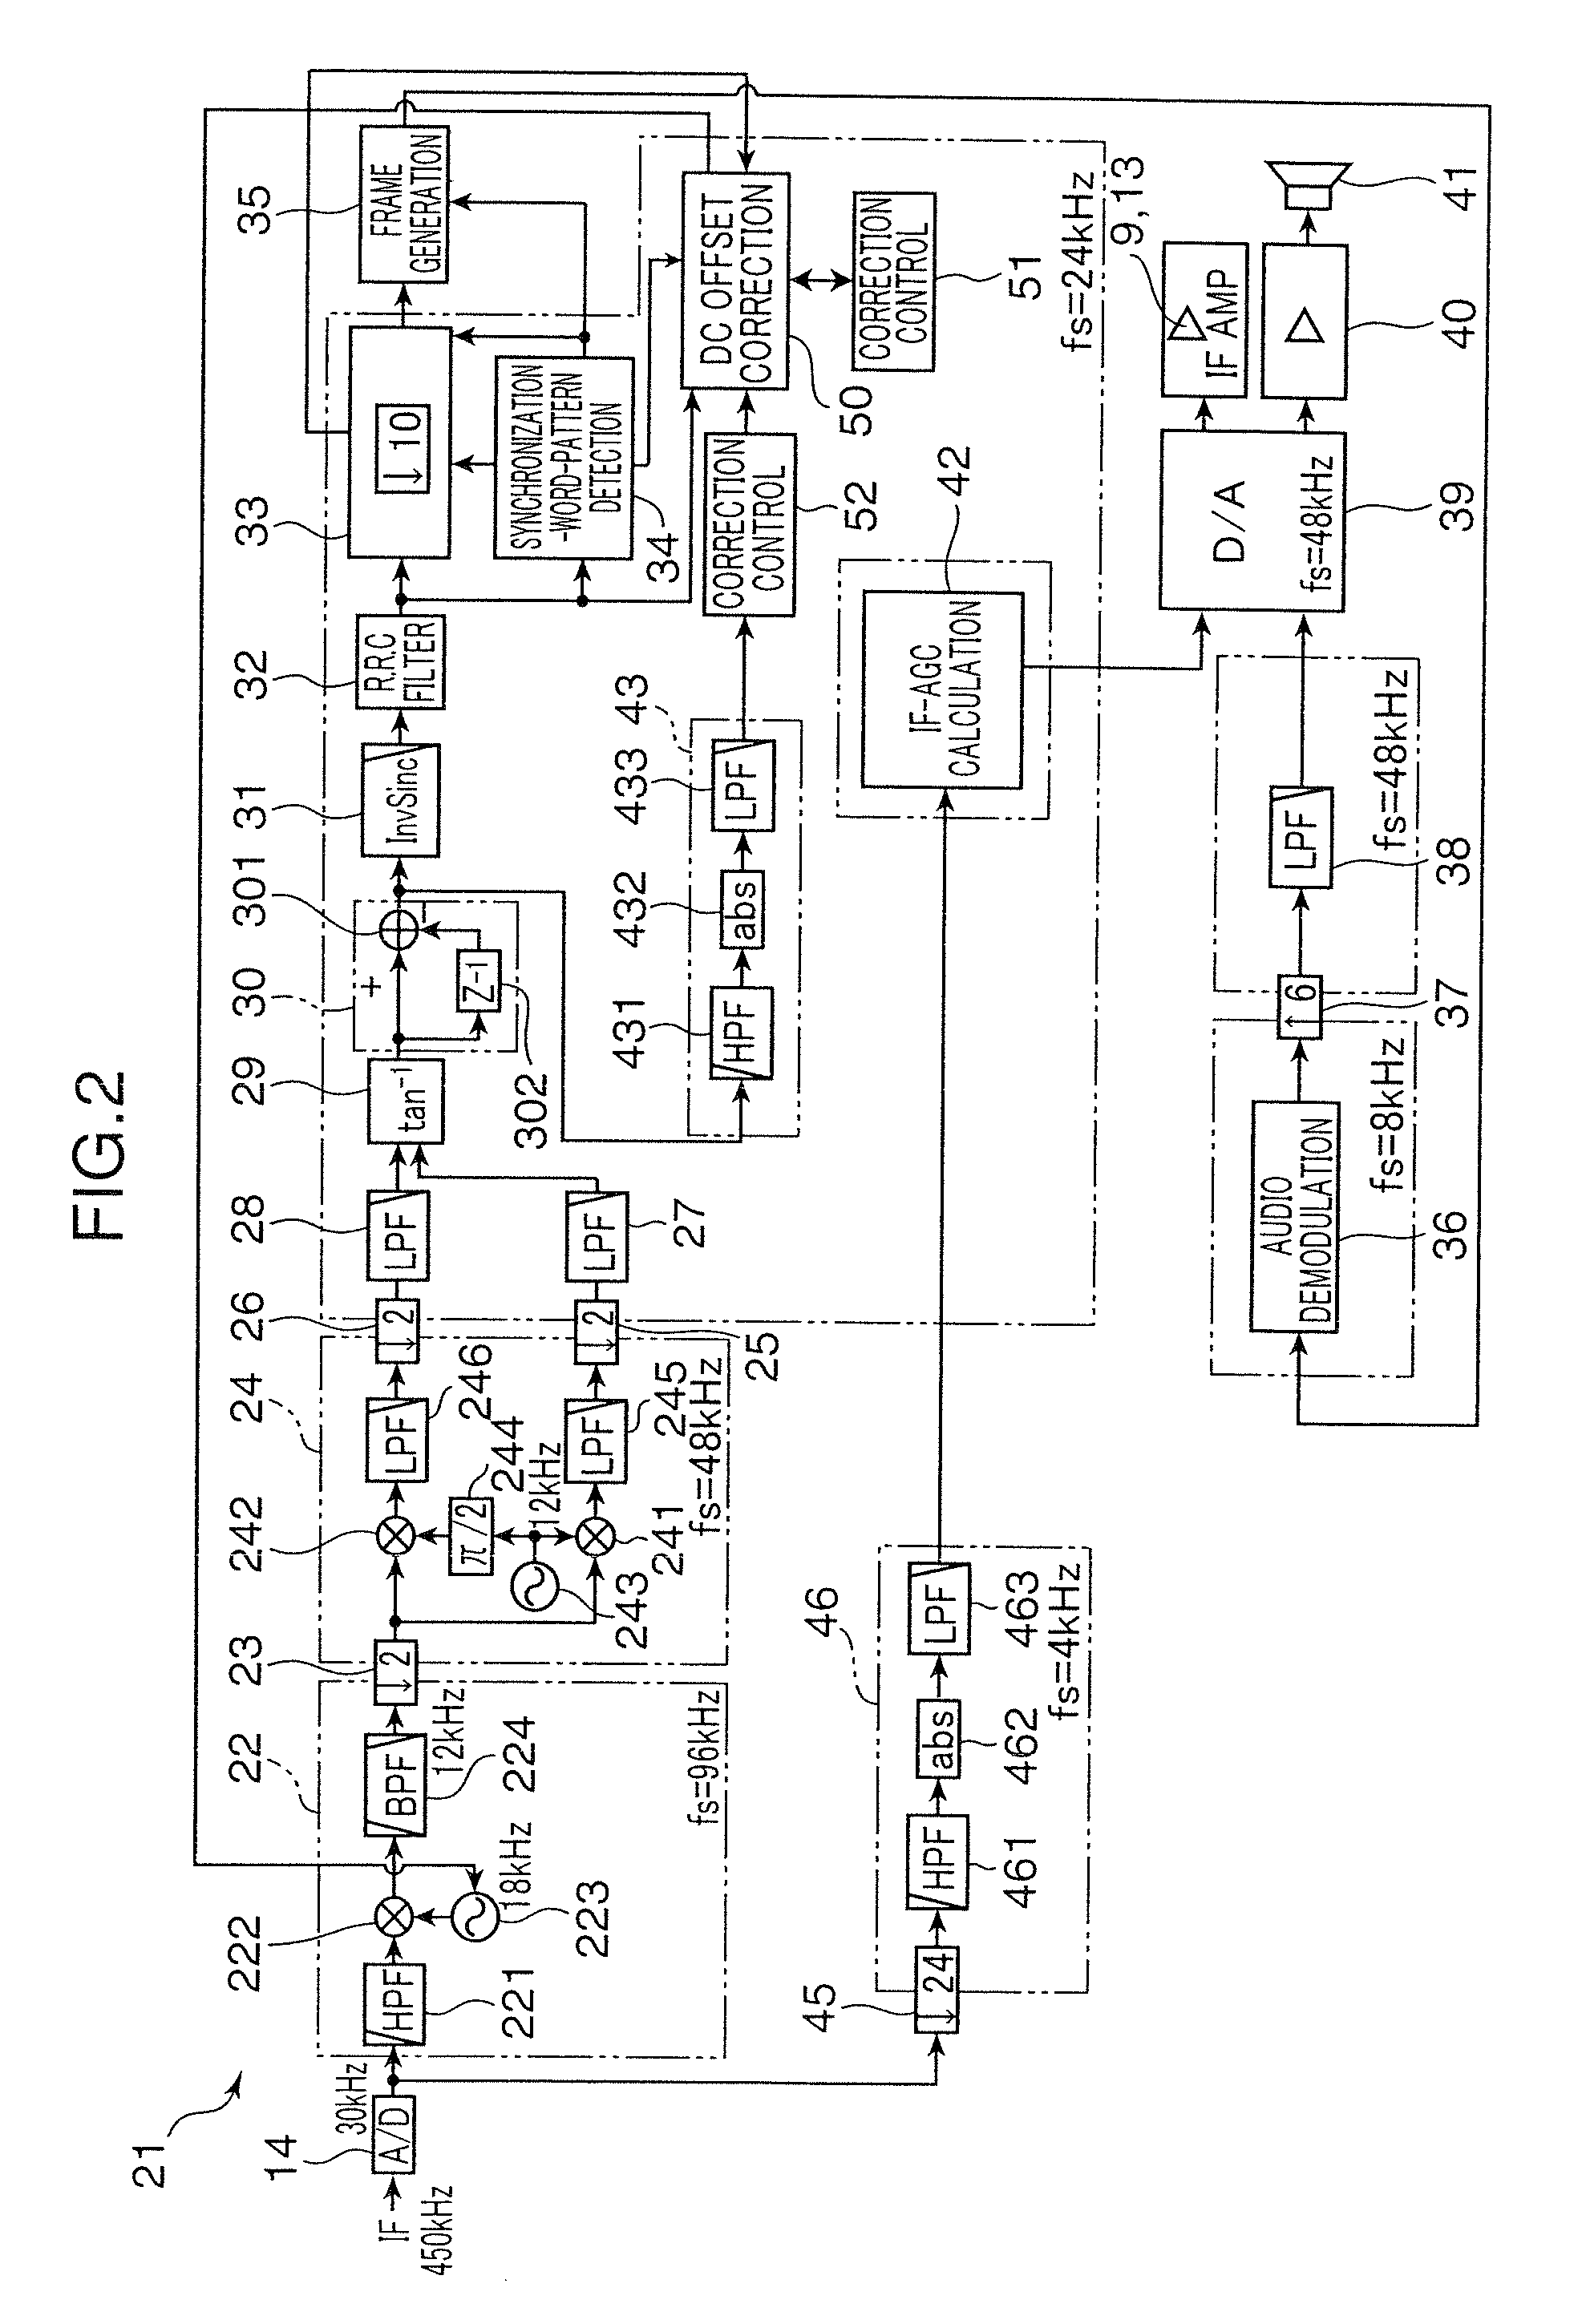 Frame sync detecting circuit and fsk receiver using the same